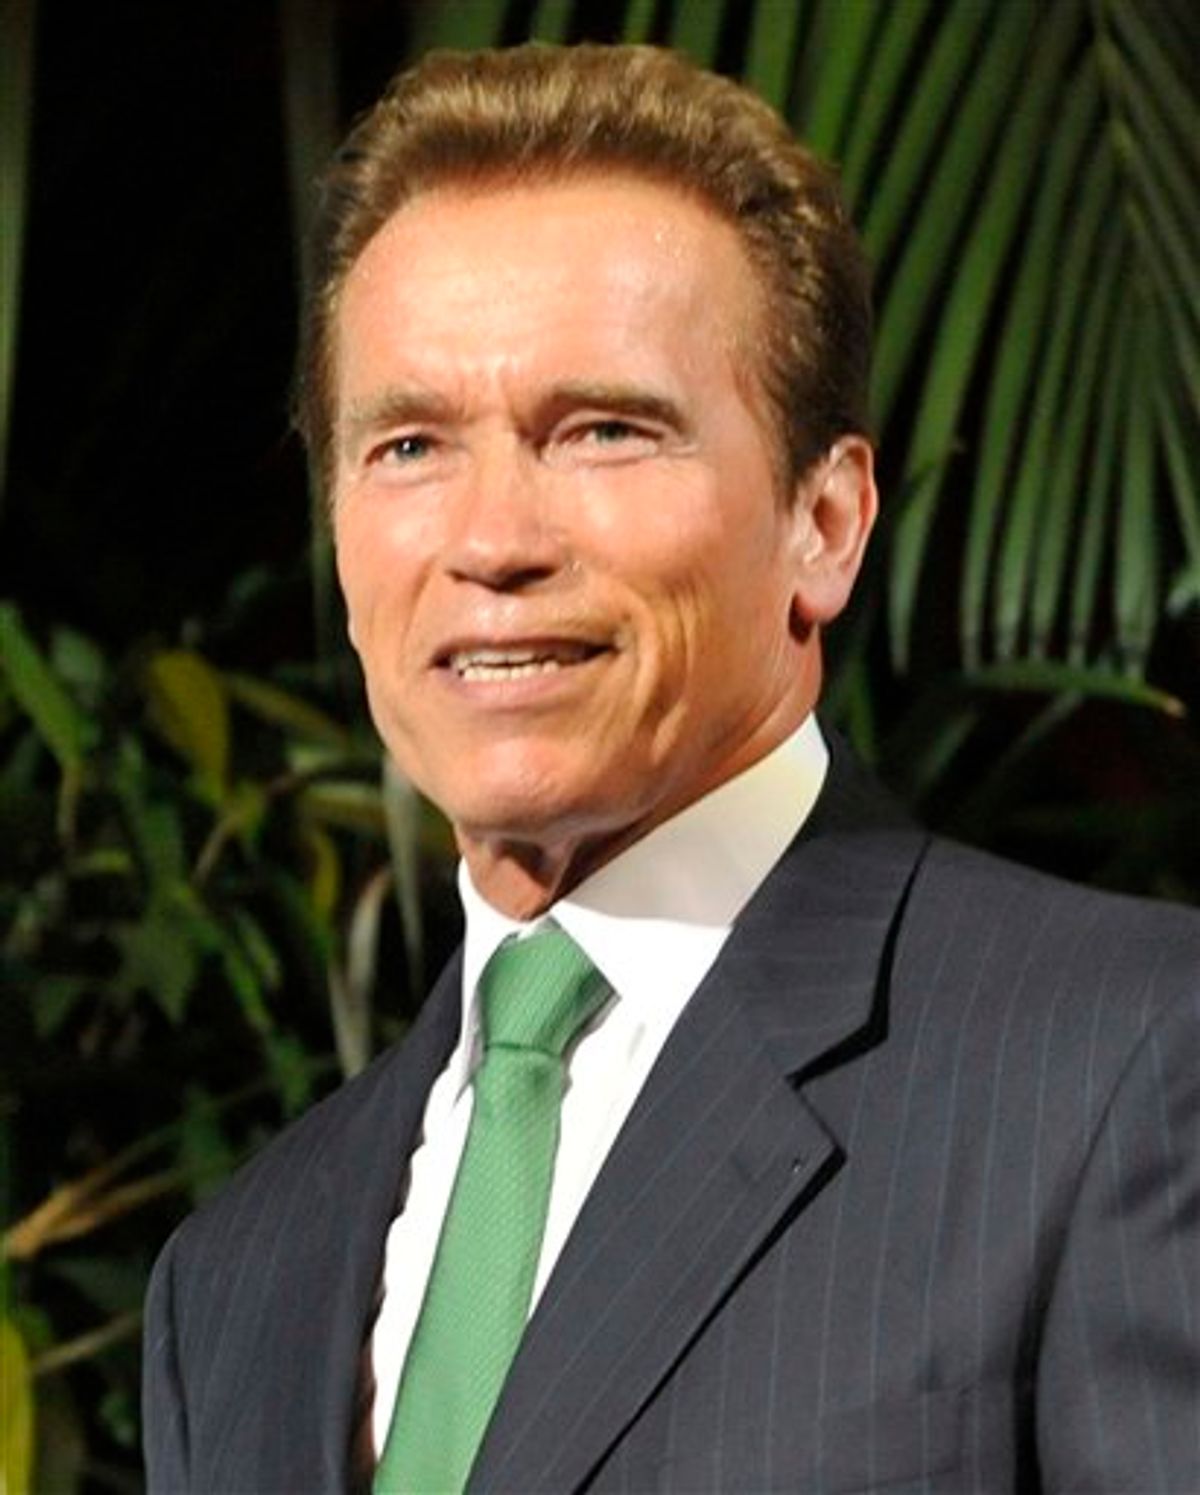 FILE - In this June 21, 2011 file photo, former Gov. of California Arnold Schwarzenegger attends the Energy Forum 2011 in Vienna, Austria. Schwarzenegger has been cast in a movie called "Last Stand". (AP Photo/Bela Szandelszky, file) (AP)